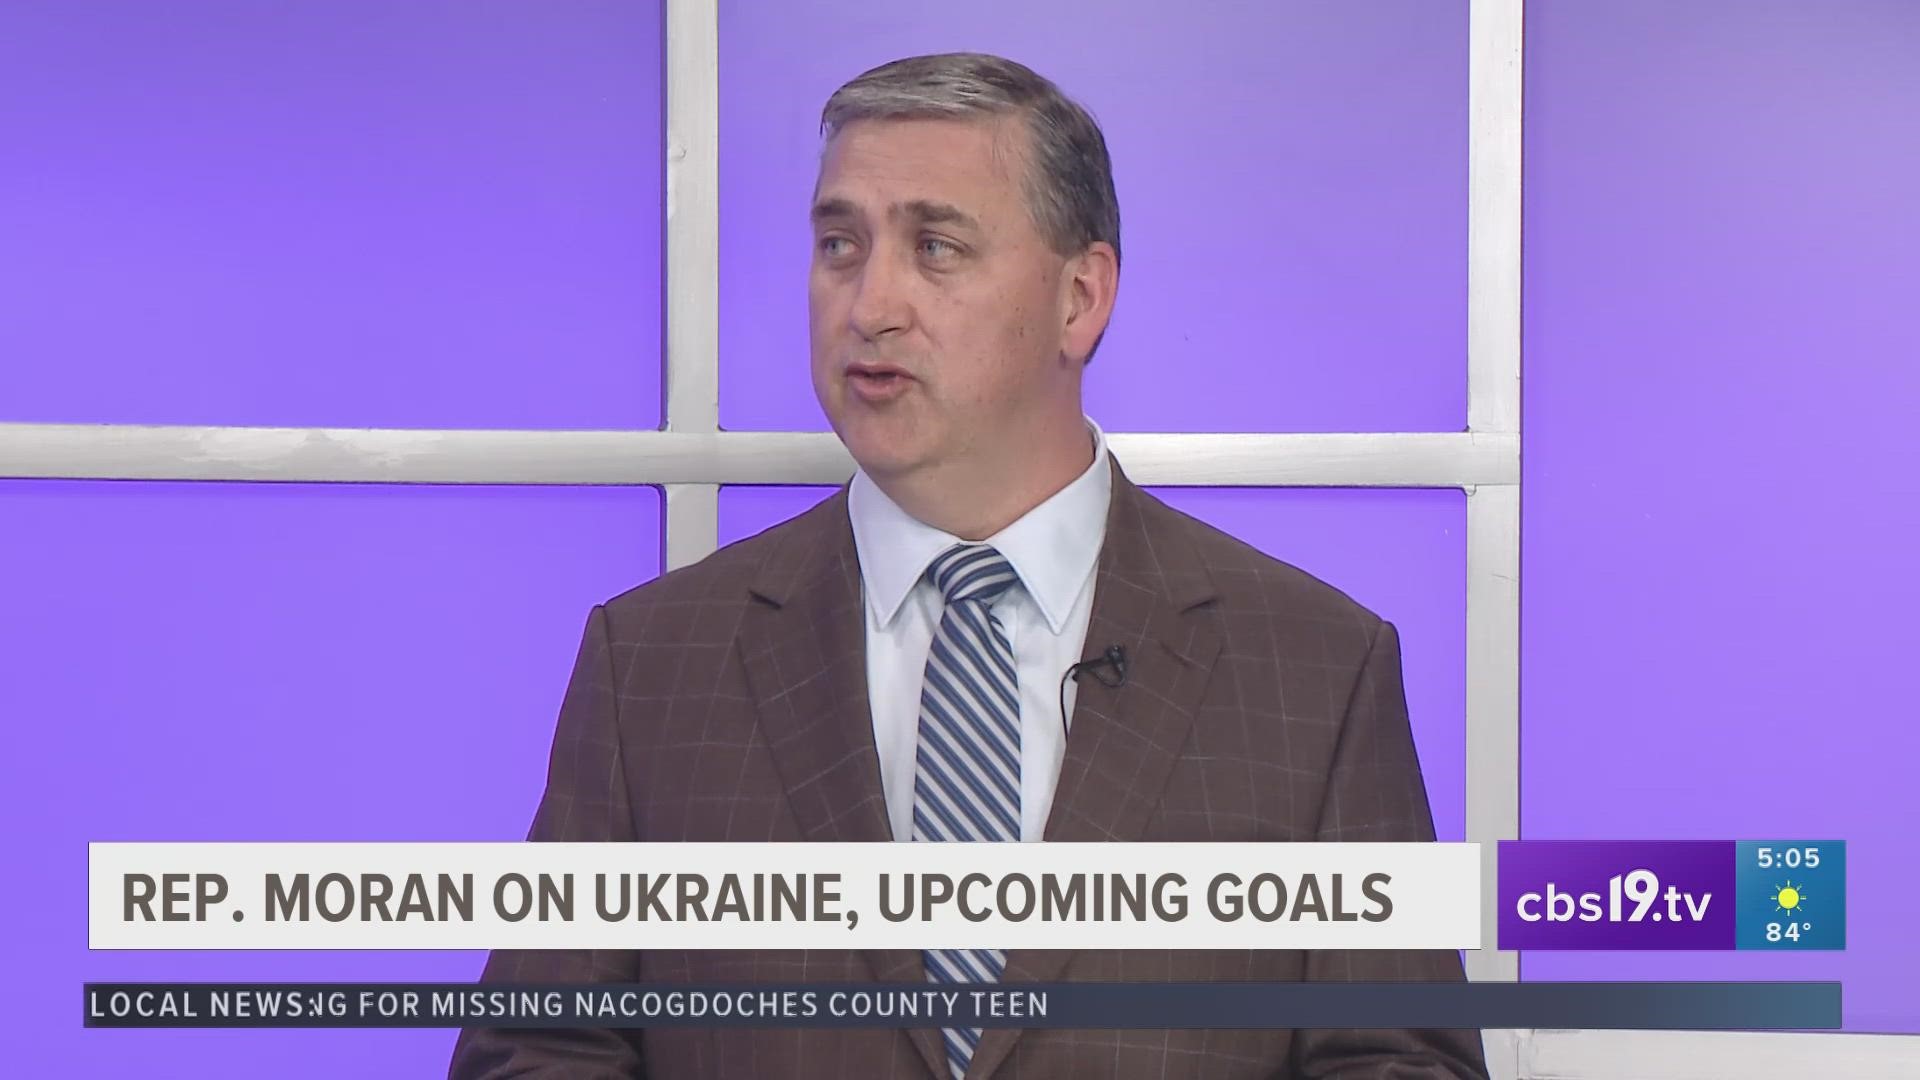 Rep. Nathaniel Moran (R-Texas) joined CBS19 News at 5 to share his reaction to President Joe Biden's visit to Kyiv and his near-term goals in TX-01 and in Washington